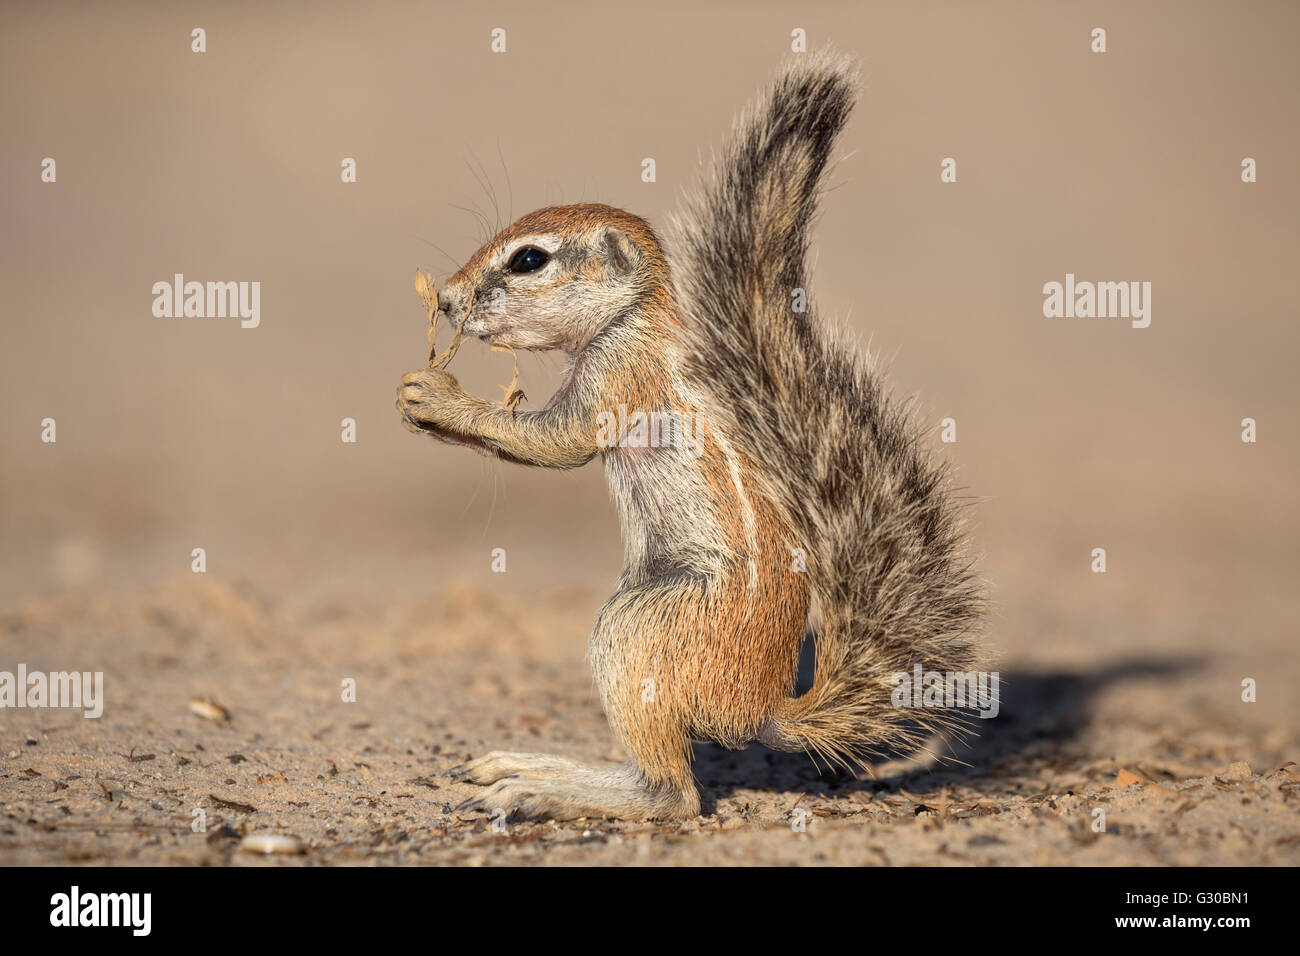 Young ground squirrel (Xerus inauris), Kgalagadi Transfrontier Park, Northern Cape, South Africa, Africa Stock Photo